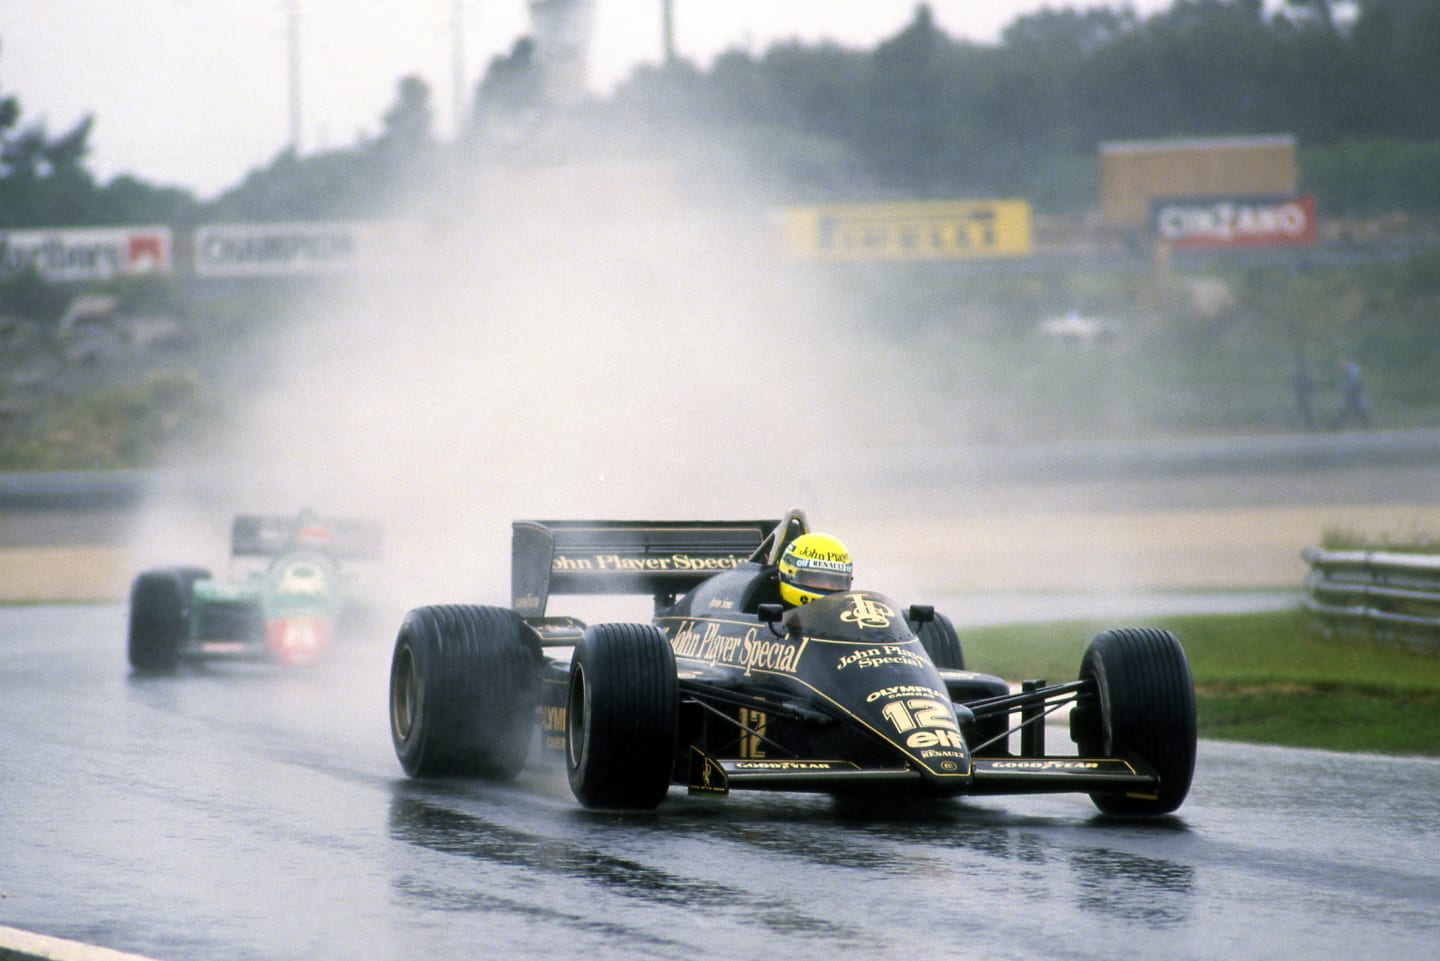 Ayrton Senna (BRA) Lotus 97T, dominated the race in appalling conditions to claim his first Grand